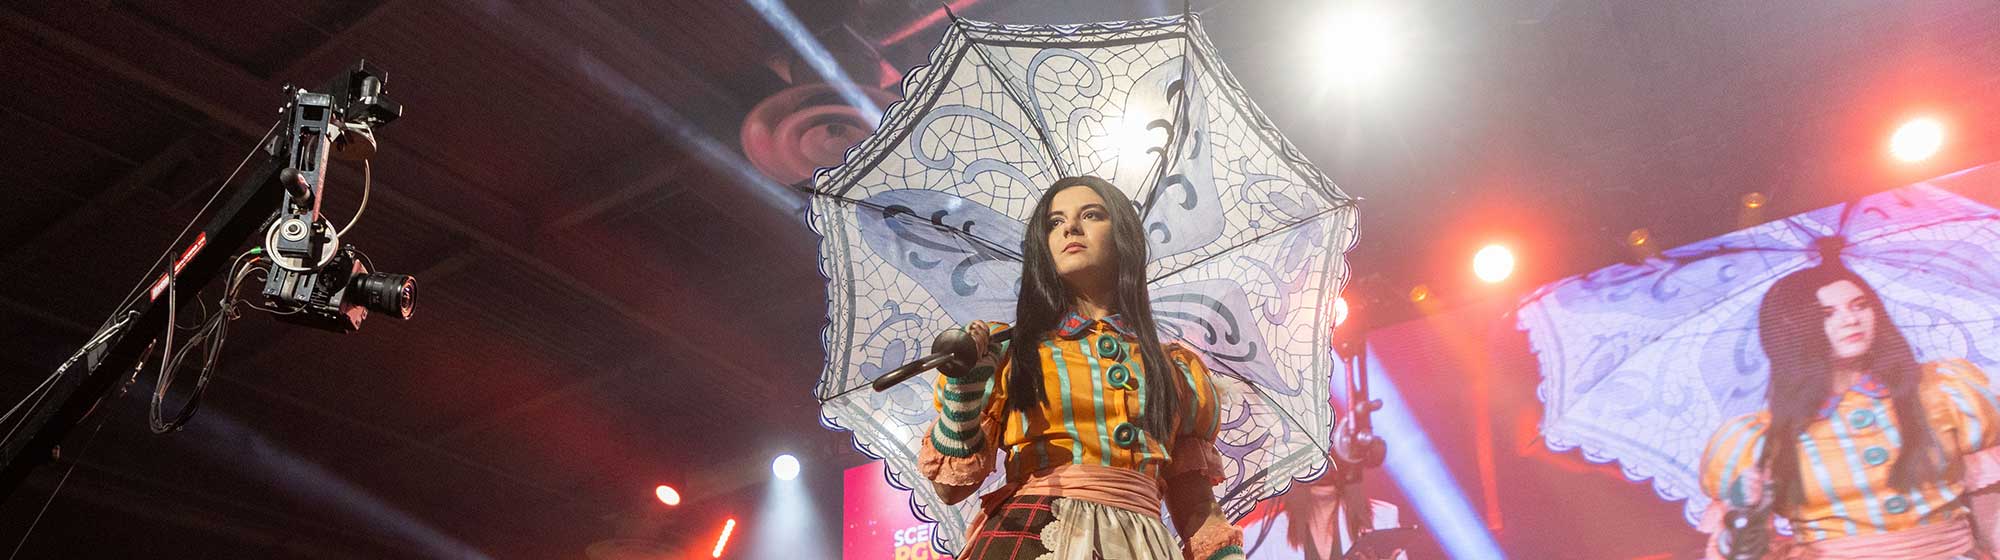 The cosplay of the main character of Alice Madness Returns during the cosplay competition organised at Paris Games Week 2023